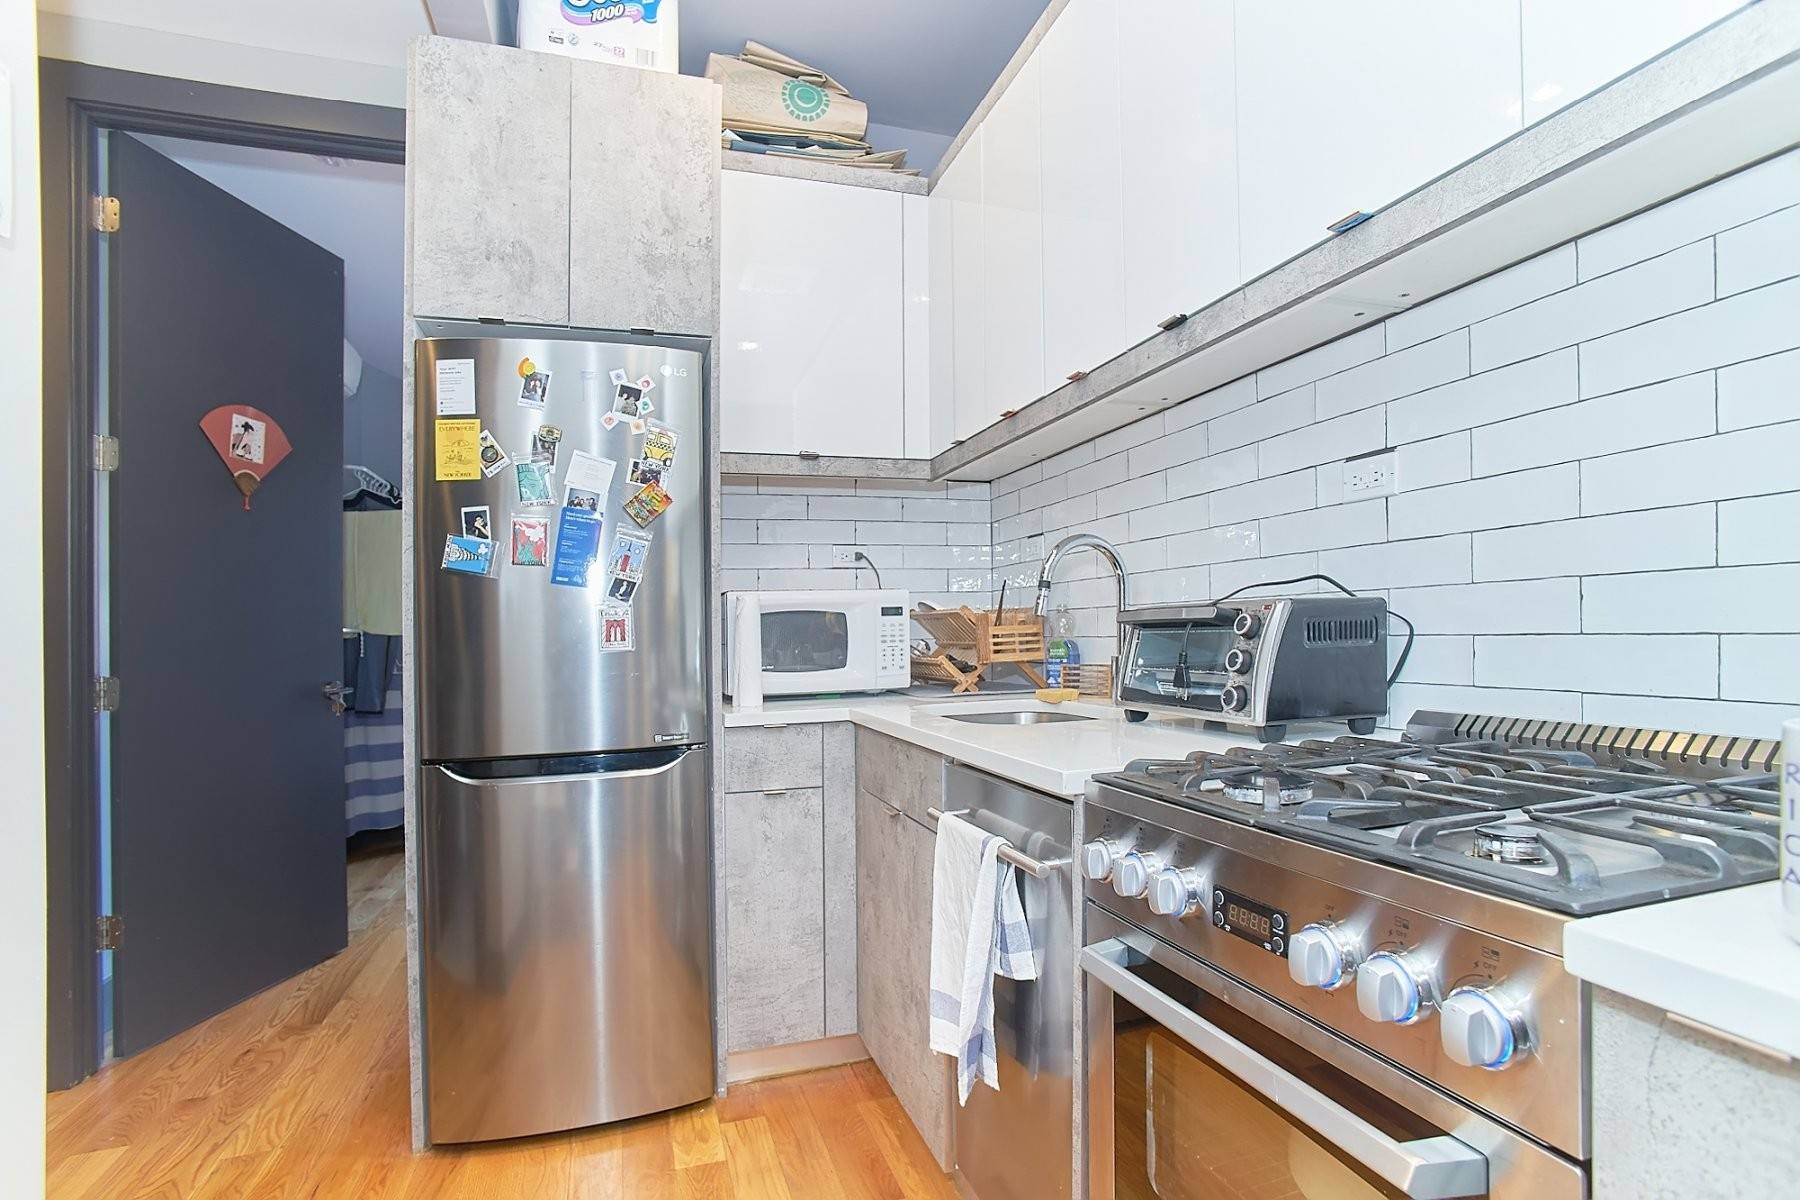 Features Lots of sunlight Hardwood floors amp ; high ceilings Dishwasher Duplex Smart home Bluetooth Common Backyard Microwave Stainless Steel Appliances Stone Kitchen Counter tops Common Roof Decks Common Laundry ...